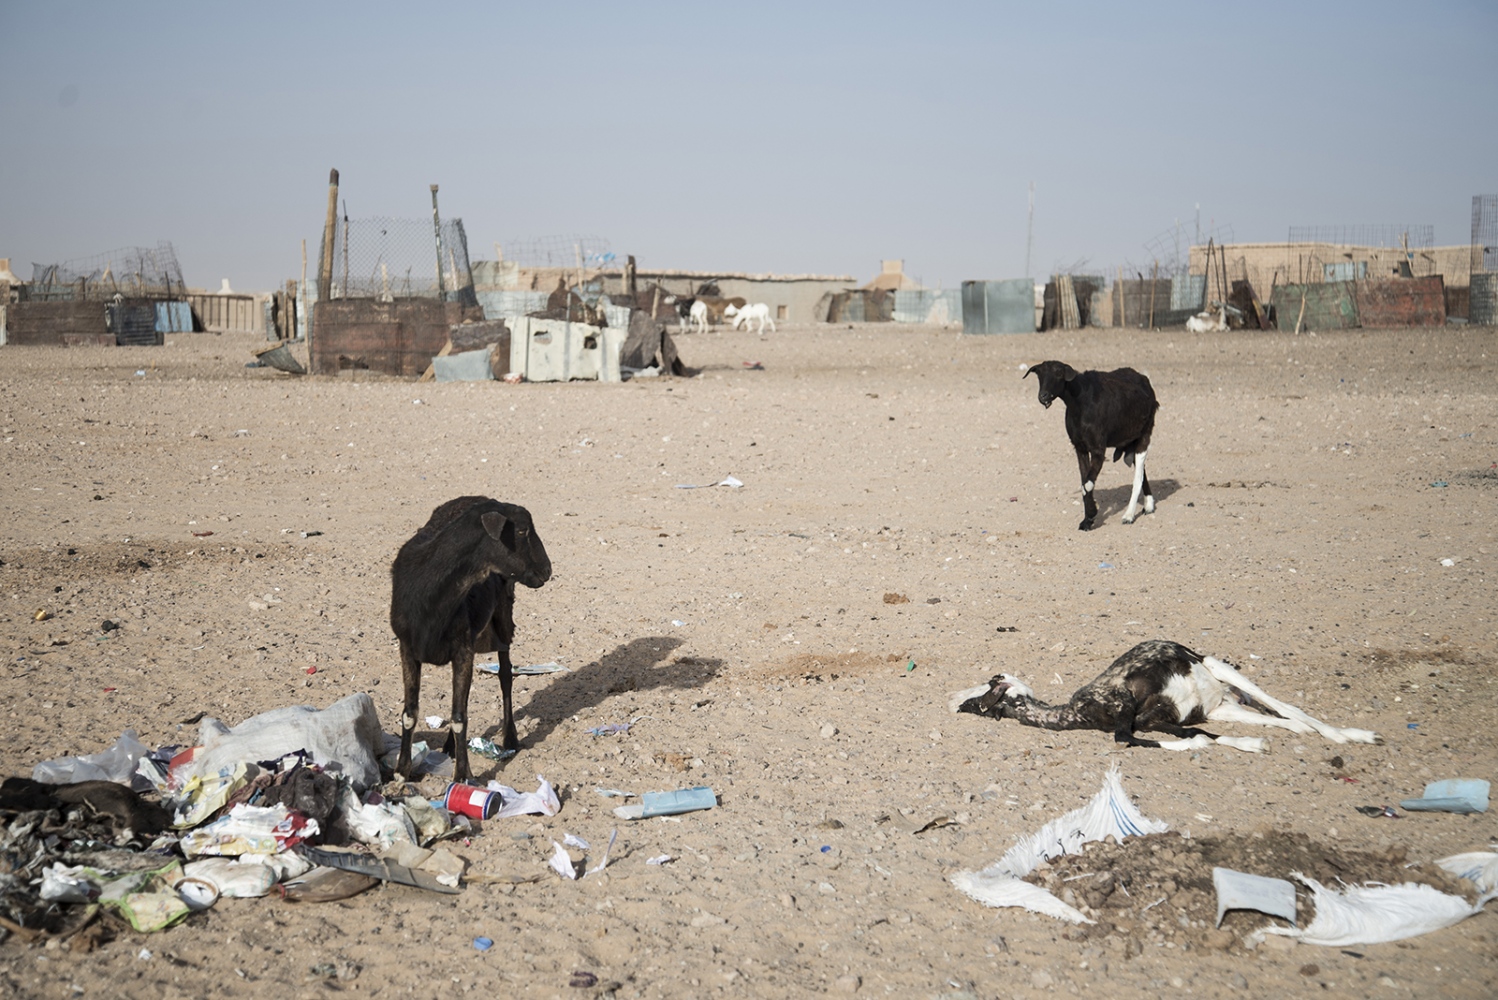 Behind The Wall, life of the Sahrawi -  A goat is about to eat from a pile of garbage that...